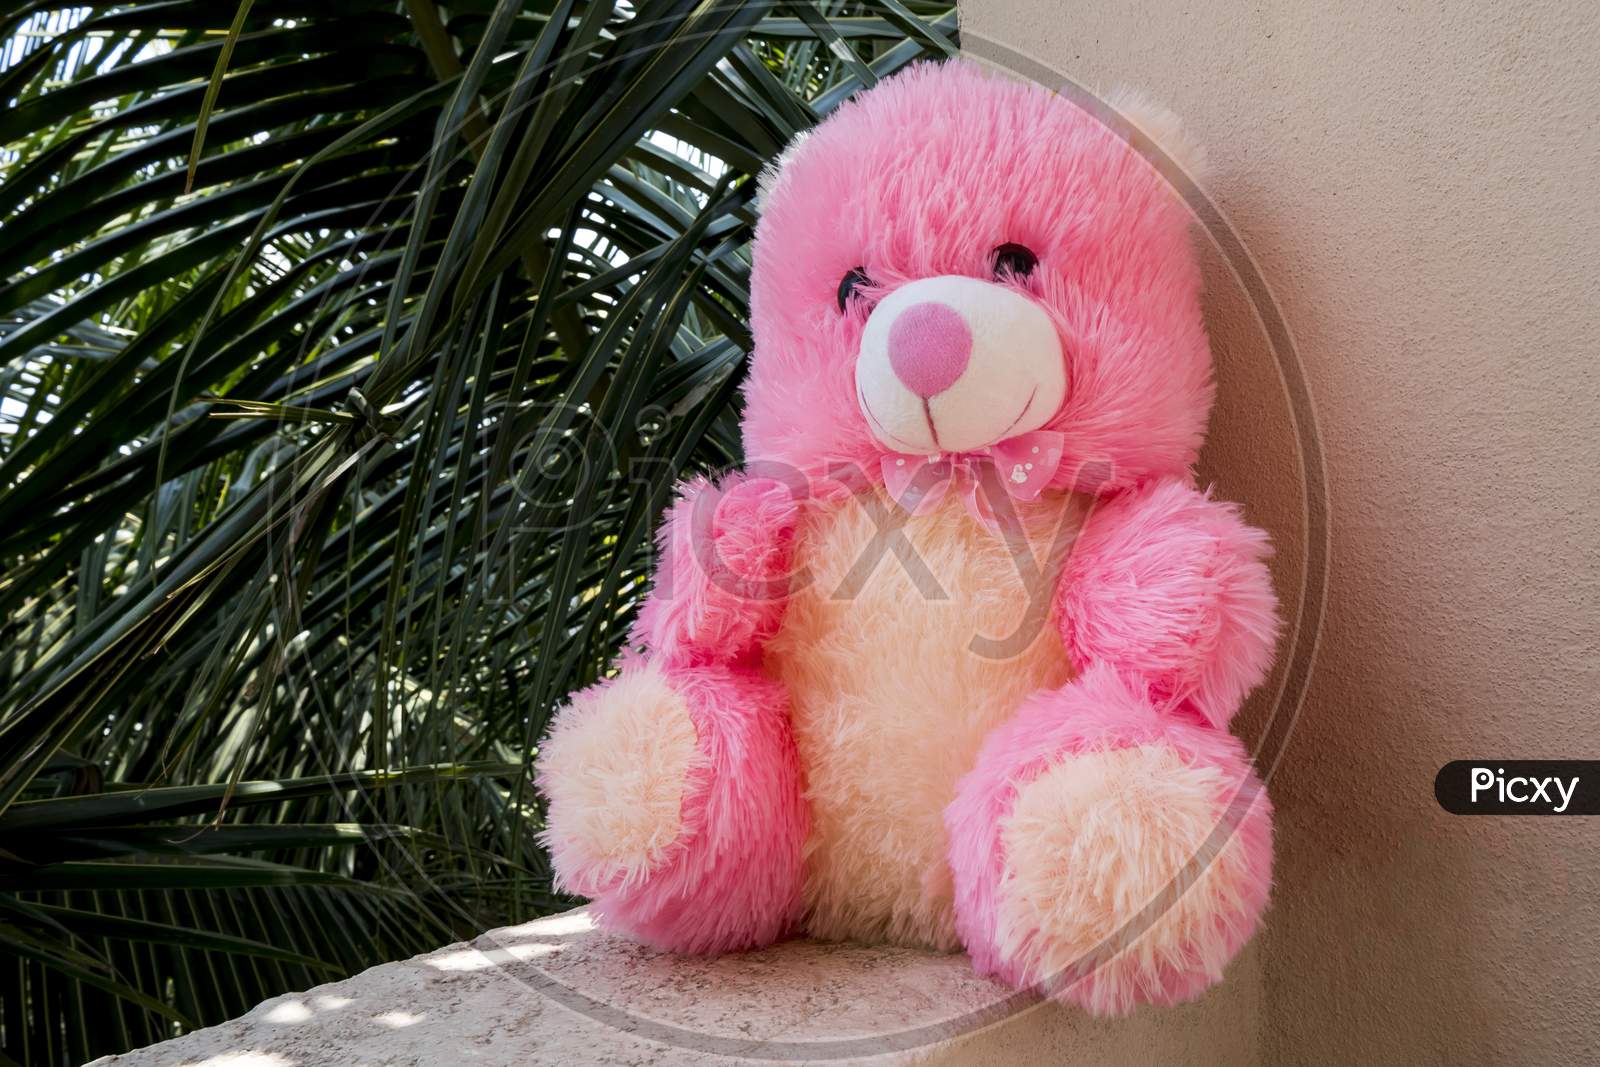 Close Shot Of Pink Teddy Bear Soft Toy Isolated On Wall